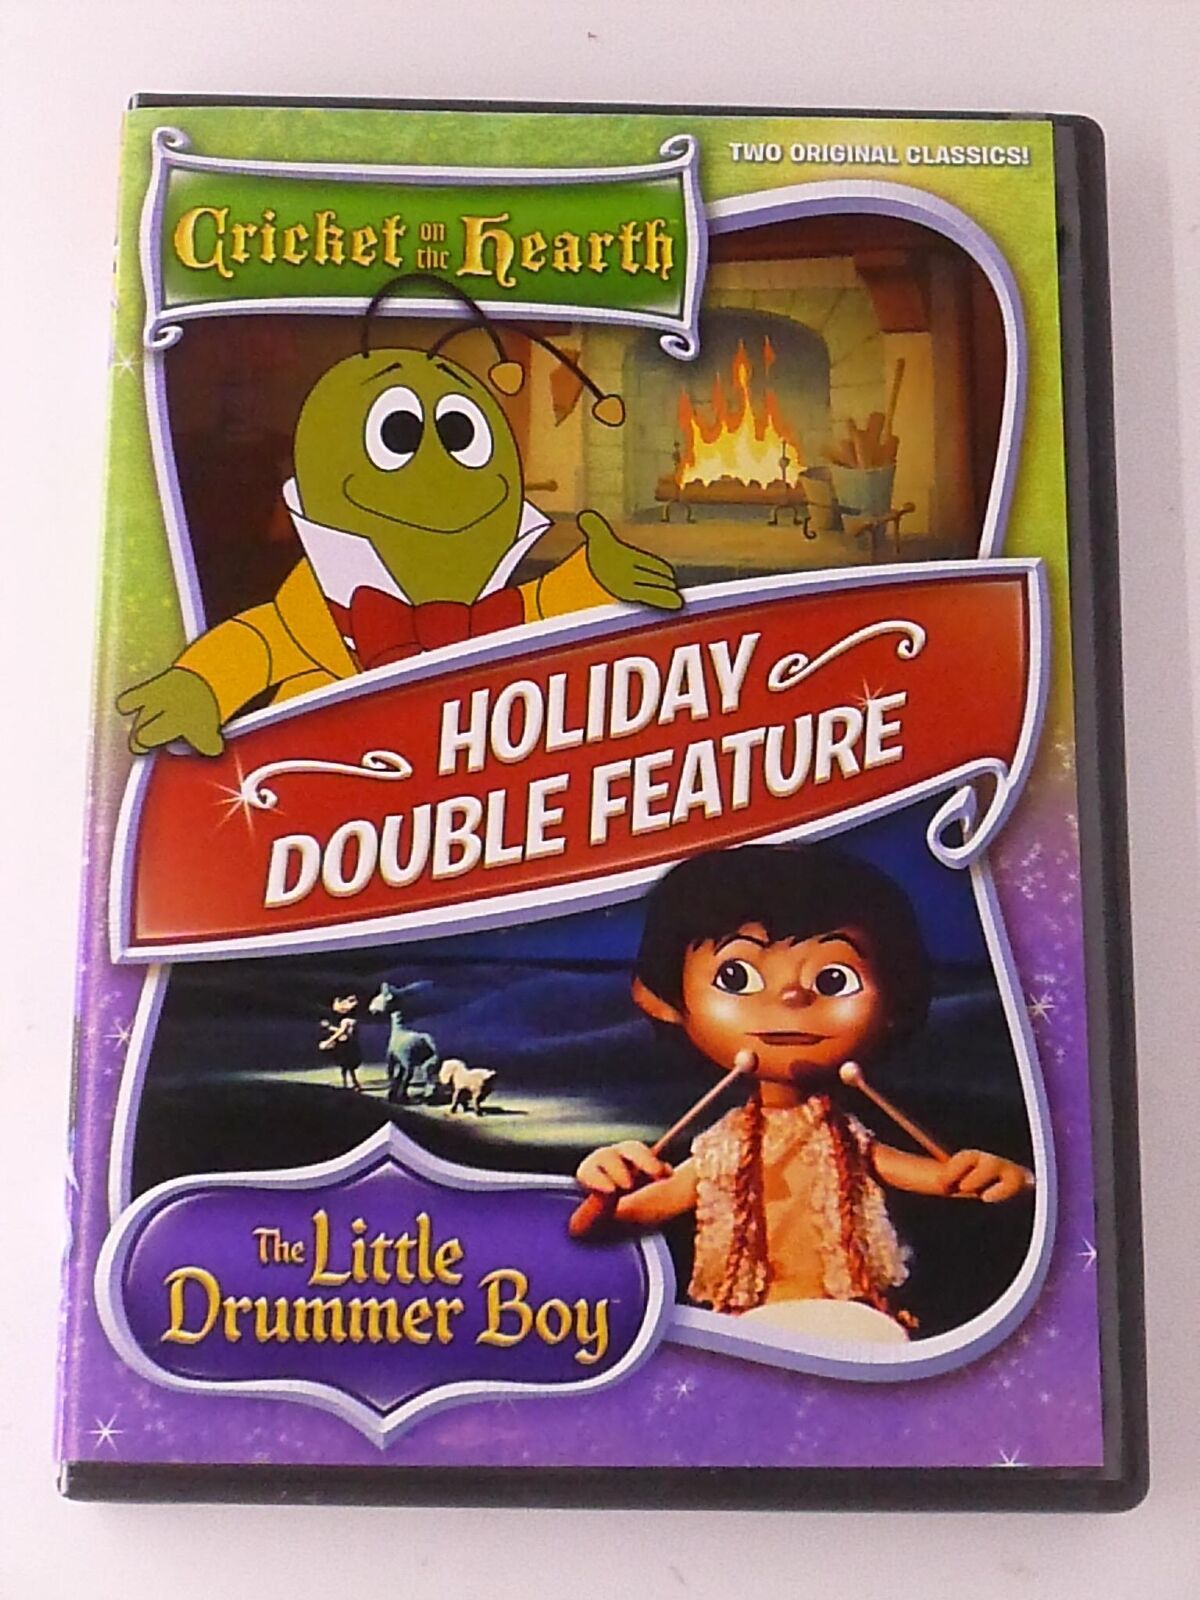 Cricket on the Hearth - The Little Drummer Boy (DVD, double feature) - J1231